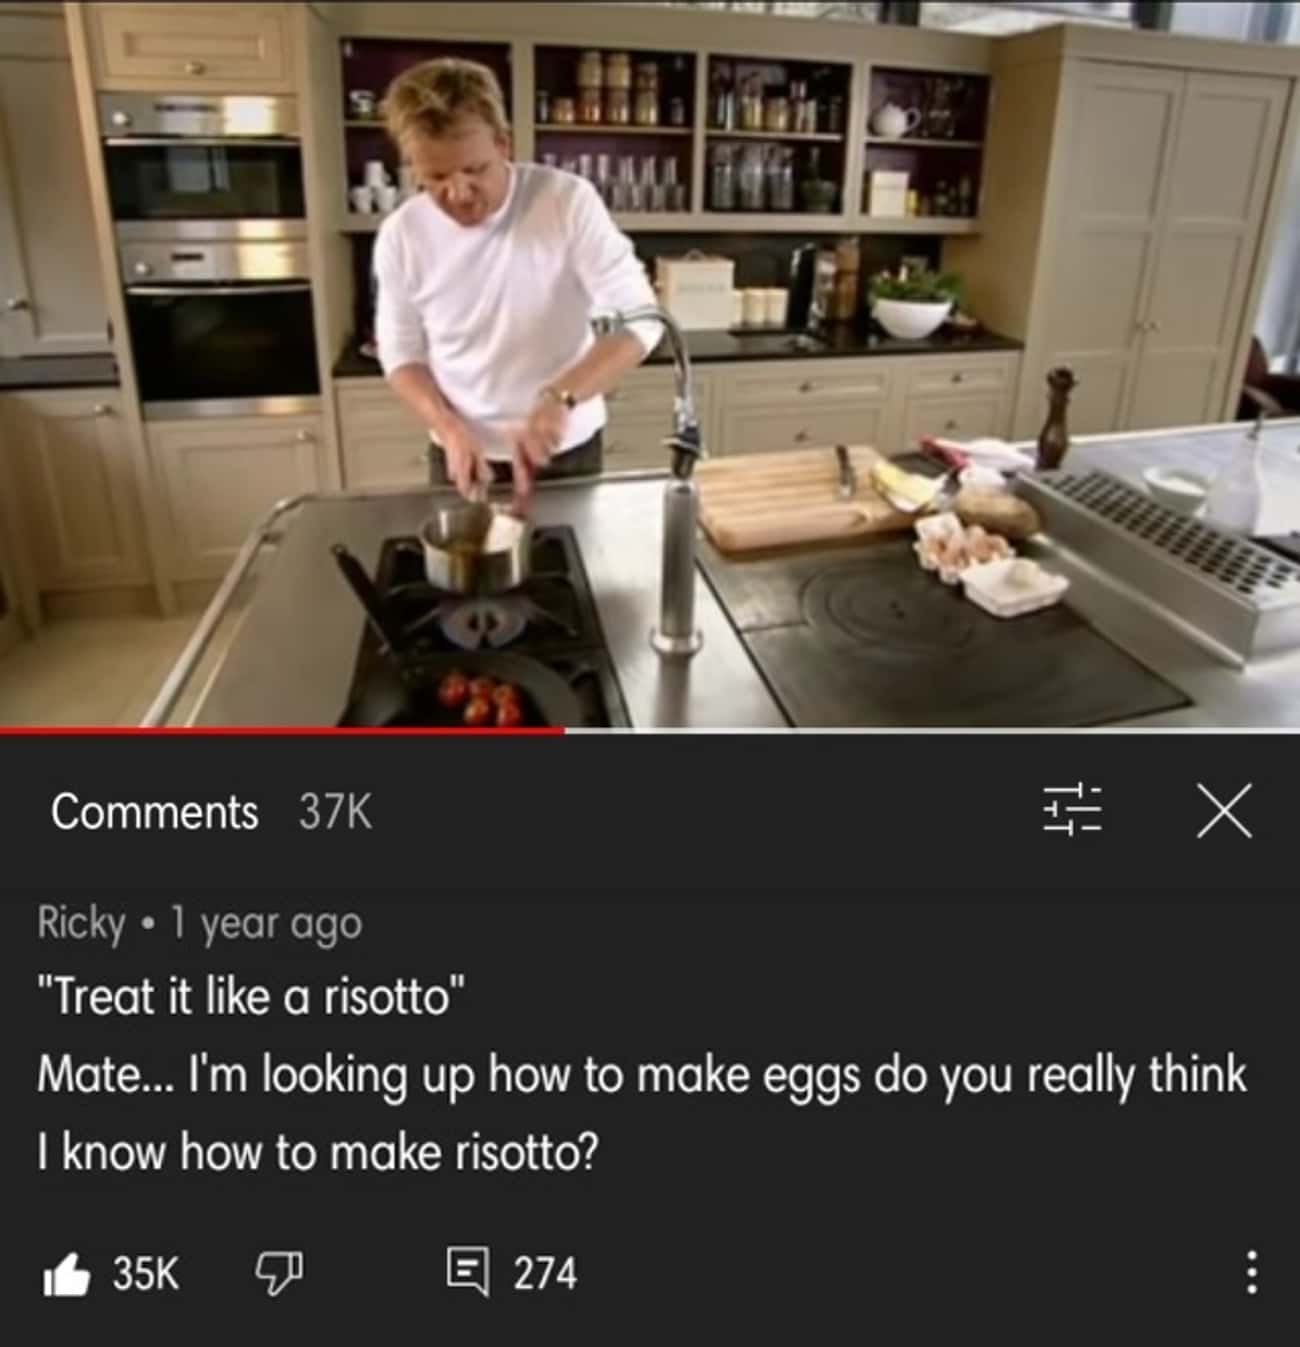 On His Video About How To Make Scrambled Eggs